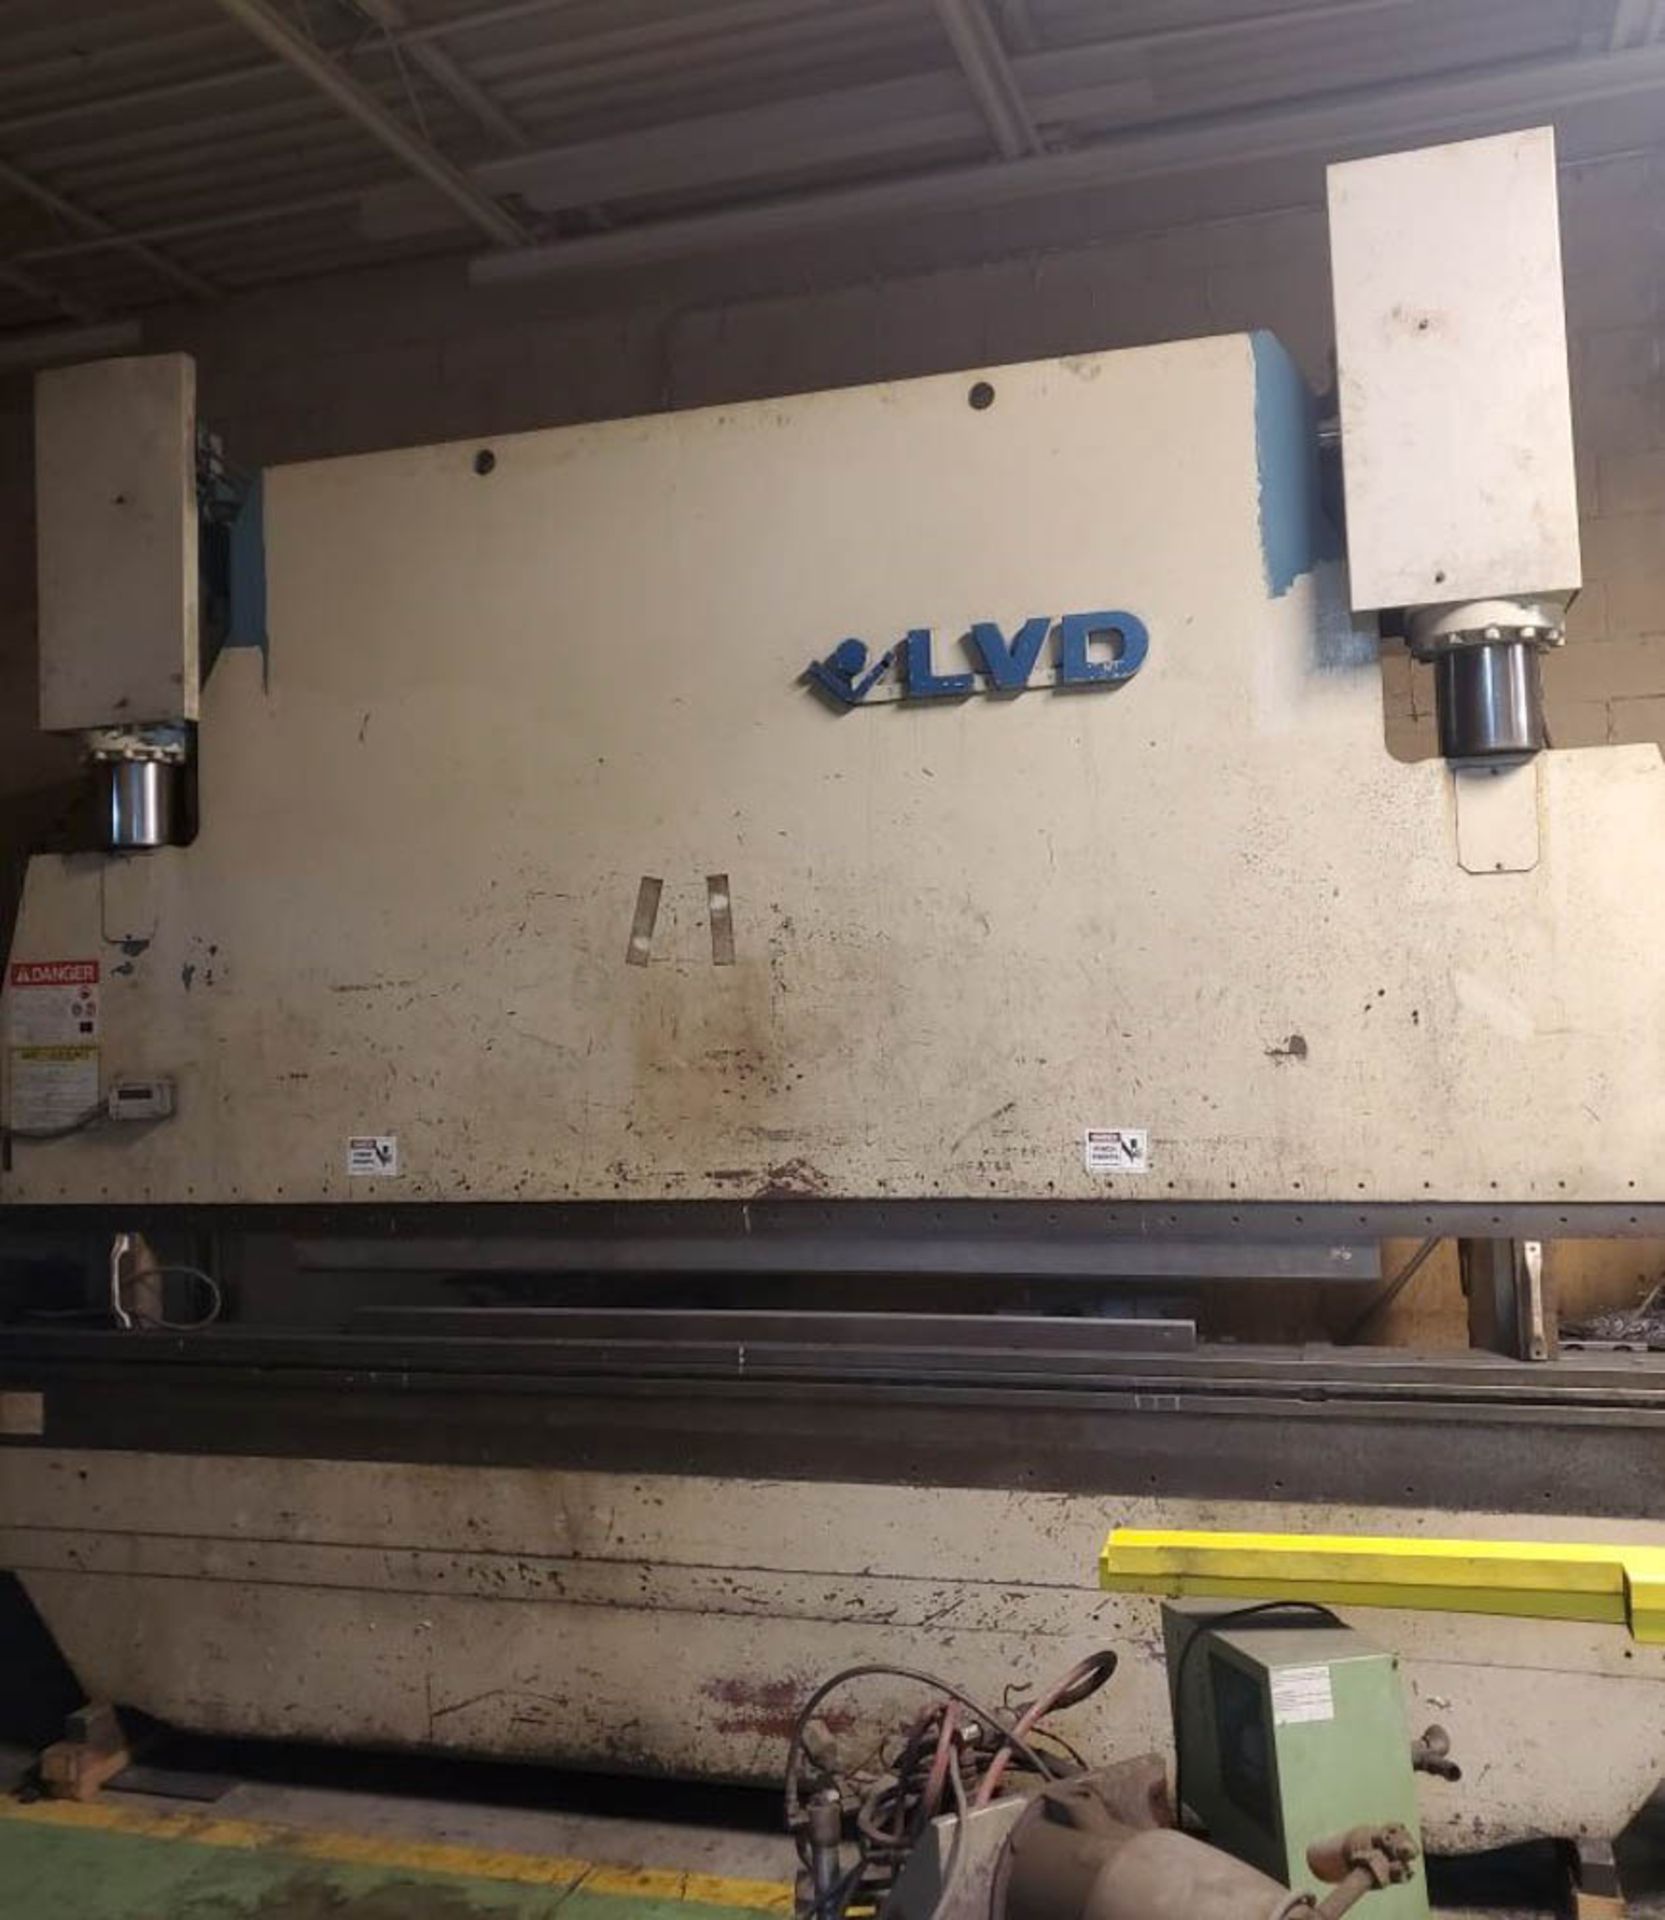 1993 LVD PPEB160-40 160 TON X 161" CNC BRAKE(located in Markle,Indiana), MNC85000, 124" BH -AS IS